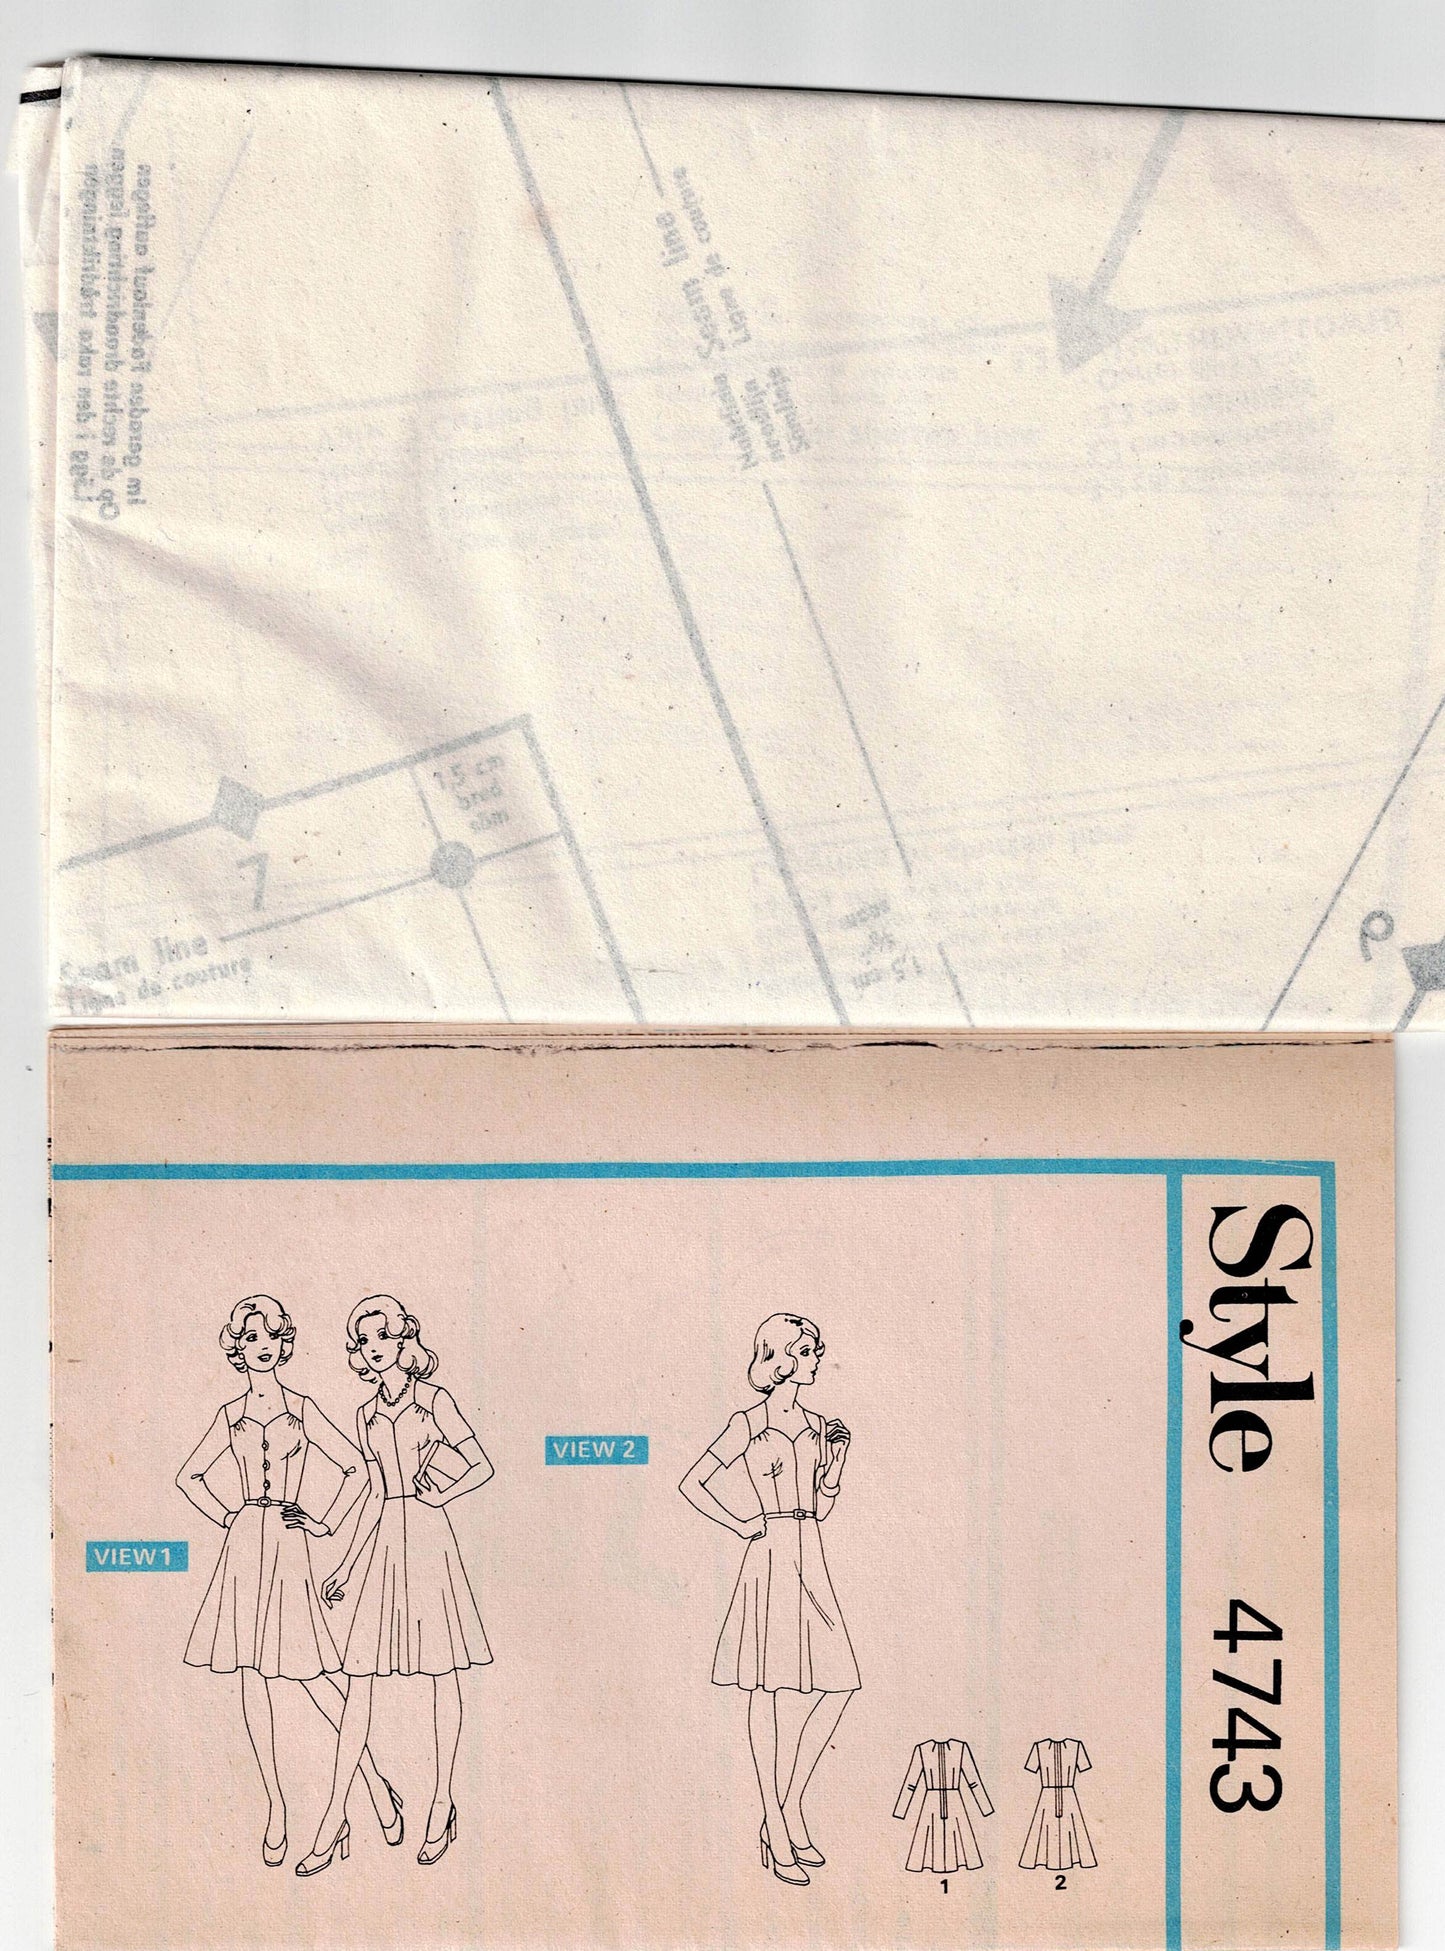 Style 4743 Womens Fit and Flared Dress with Sweetheart Neckline 1970s Vintage Sewing Pattern Size 12 Bust 34 inches UNCUT Factory Folded